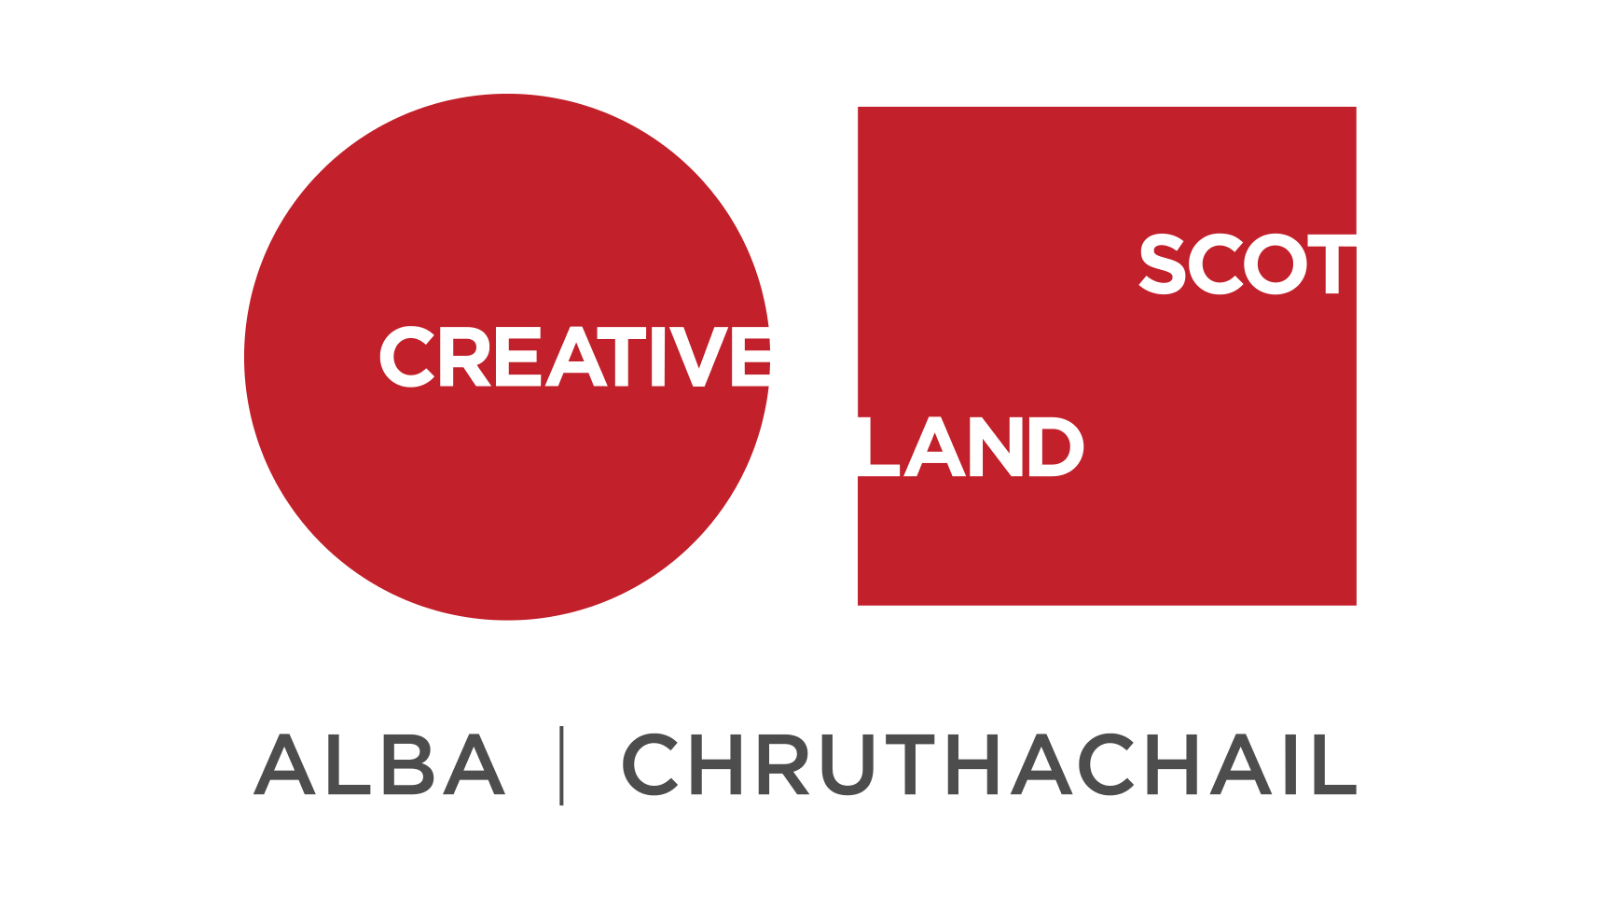 Creative Scotland seek members for new Equalities, Diversity & Inclusion Advisory Group